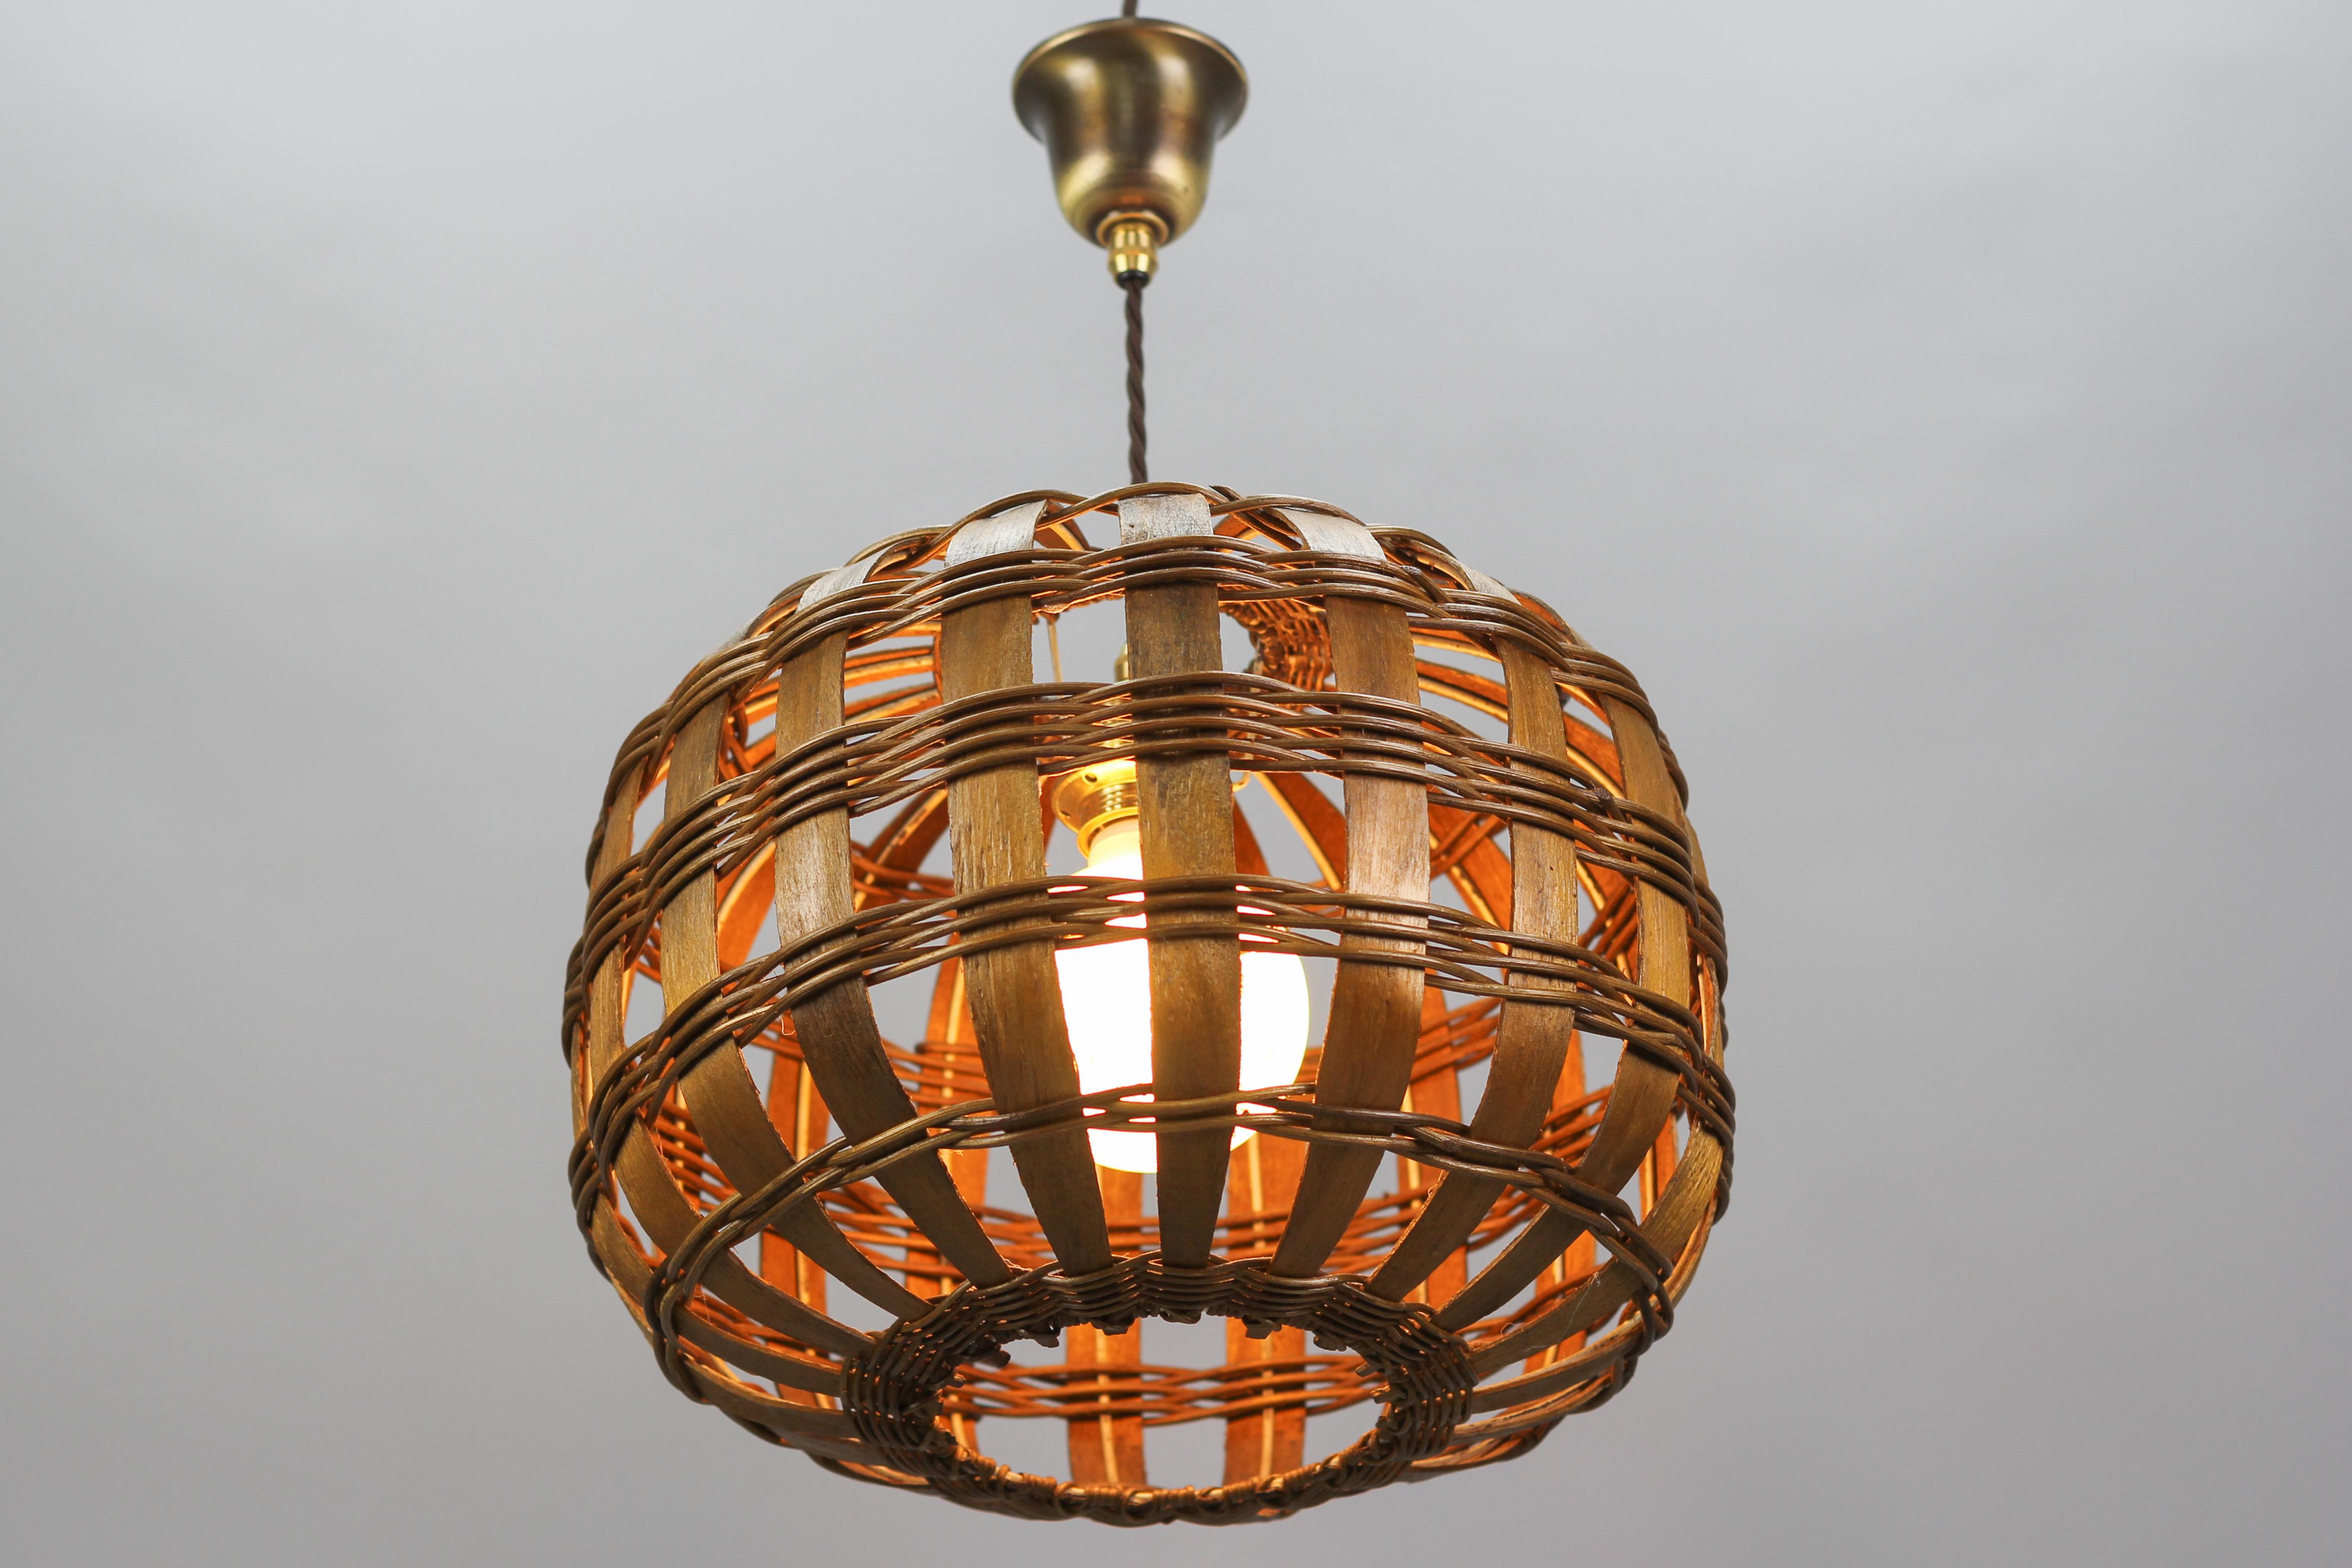 Amazing woven wood pendant light fixture with metal frame and brass canopy.
This beautiful Mid-century period round pendant lamp is height adjustable and the natural color of the wood creates a warm and diffused light. 
One socket for E27 (E26) size